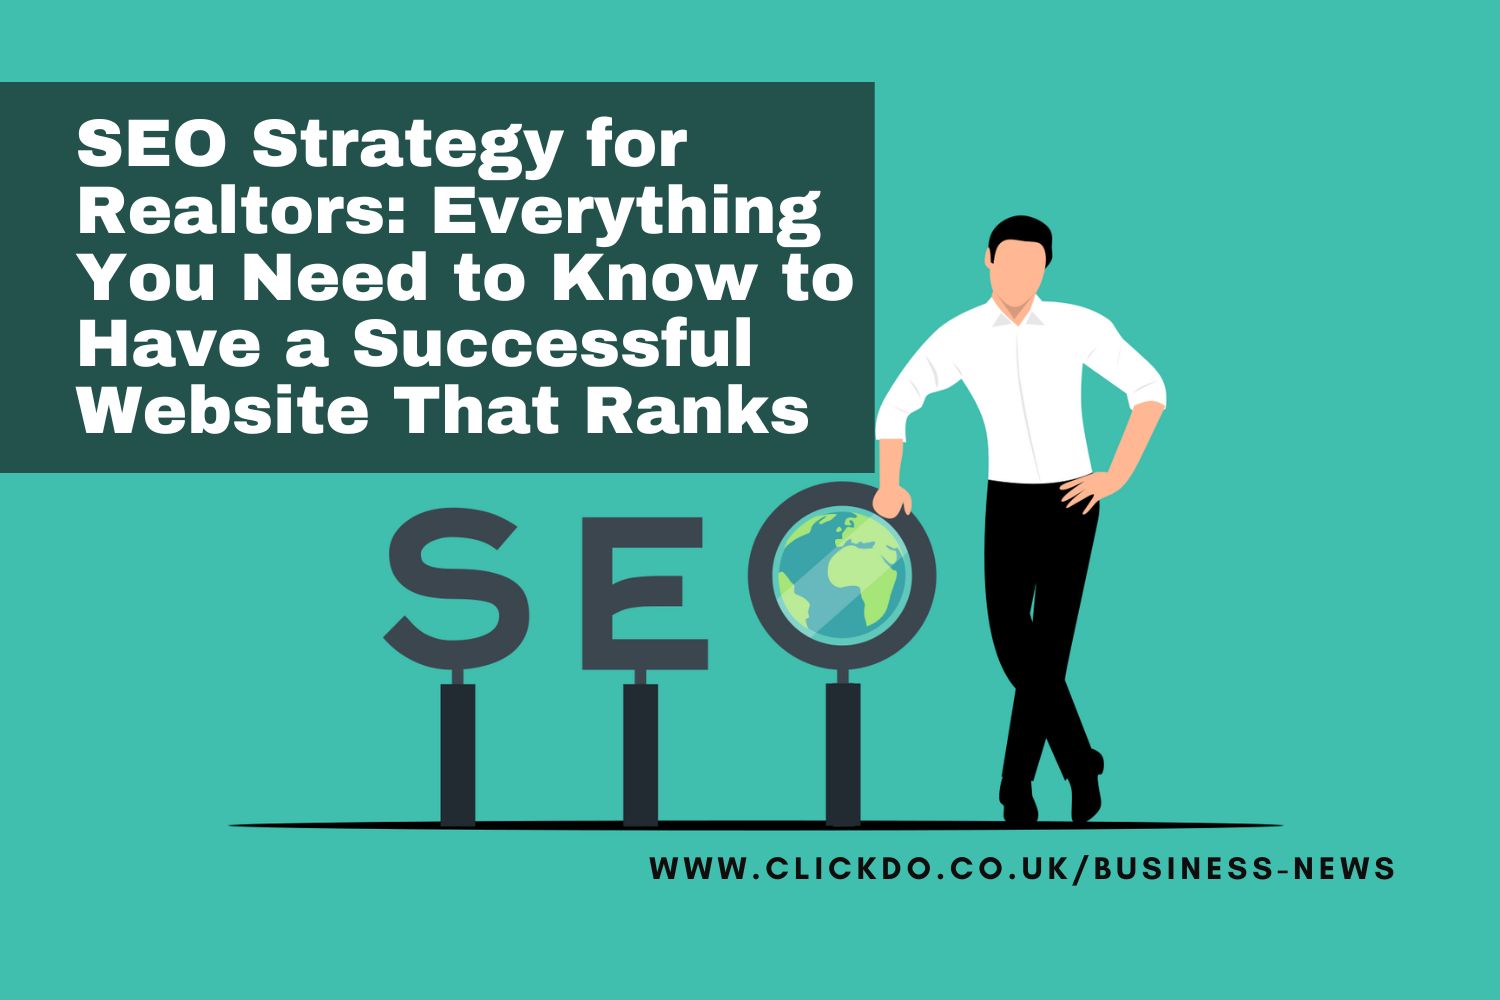 tips-to-build-an-effective-seo-business-website